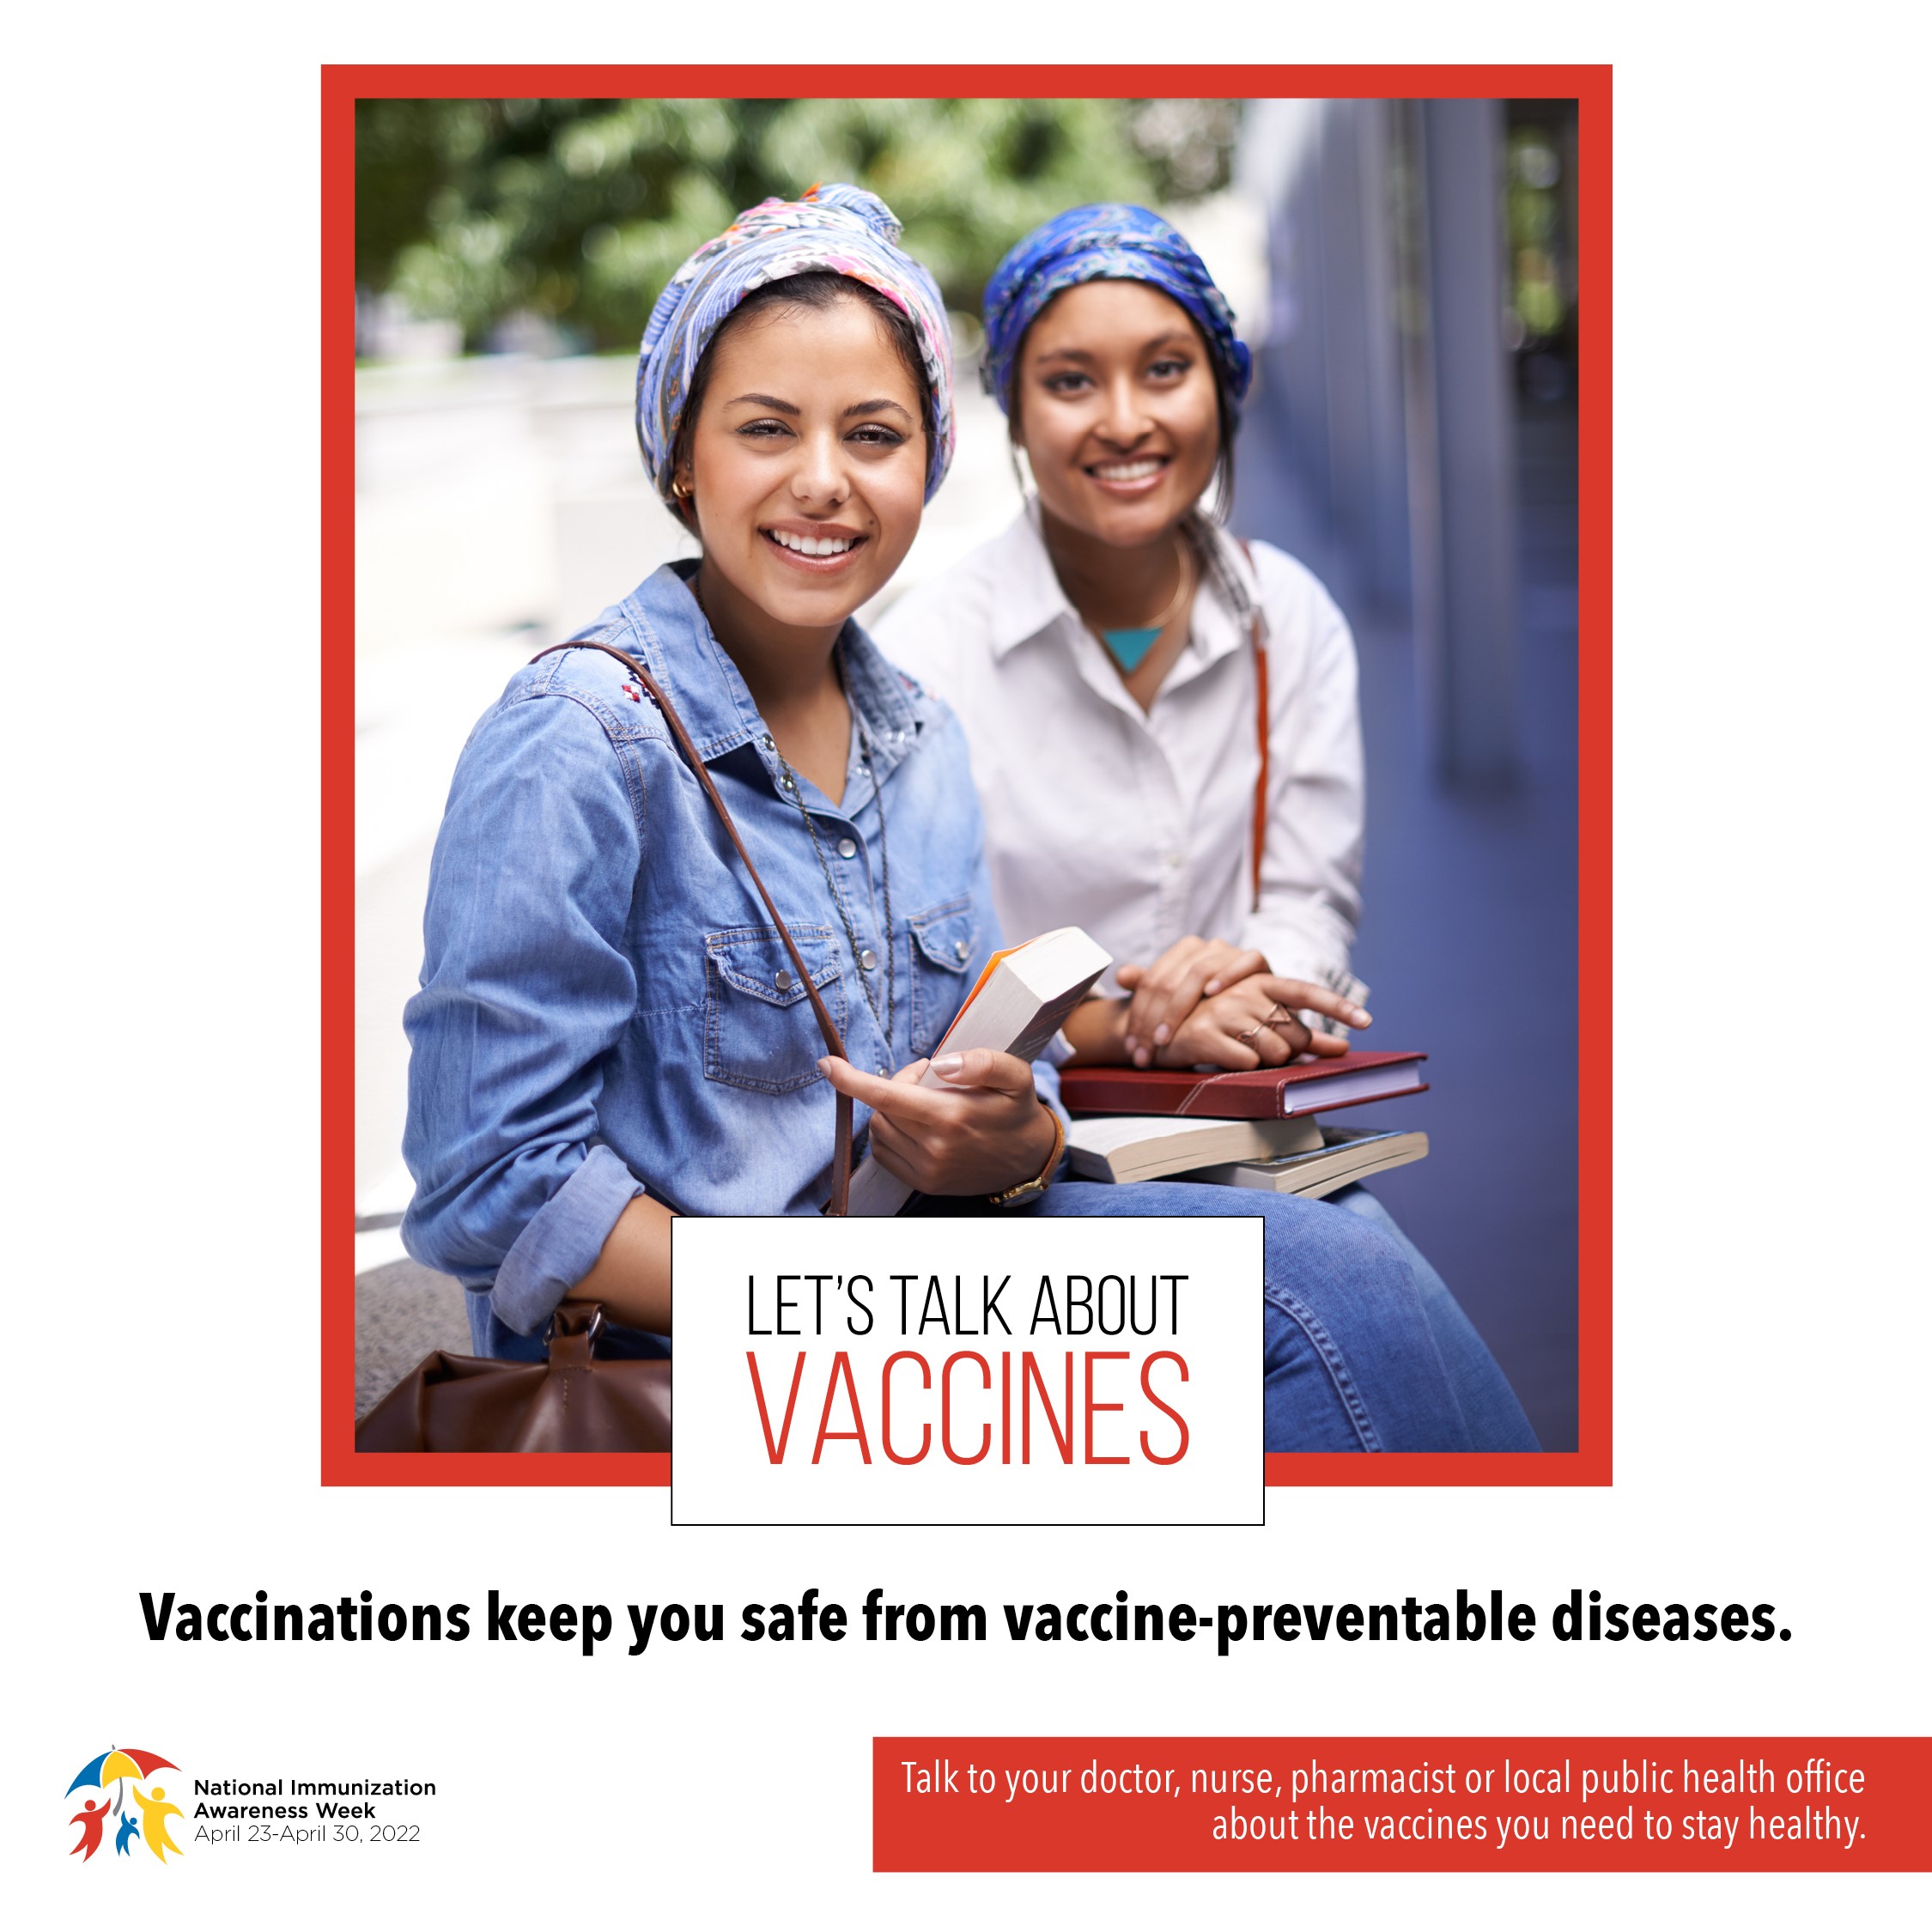 Let's talk about vaccines - social media image B for Facebook and Instagram